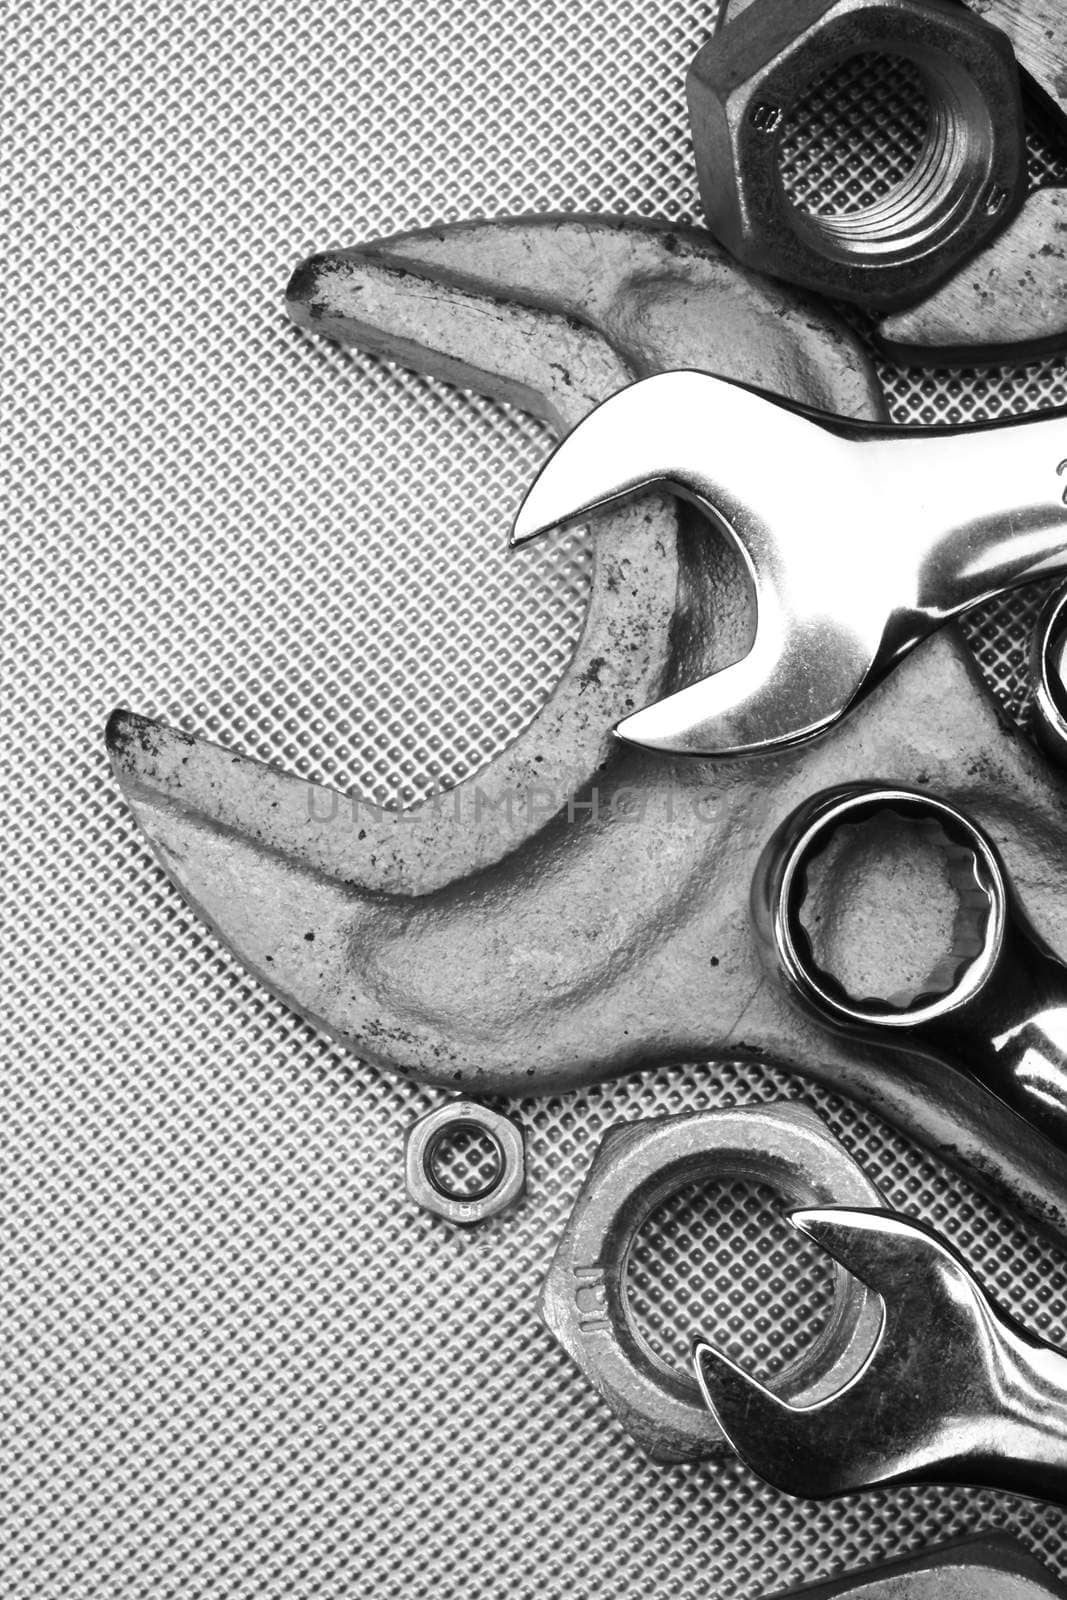 Some wrenches and nuts black and white